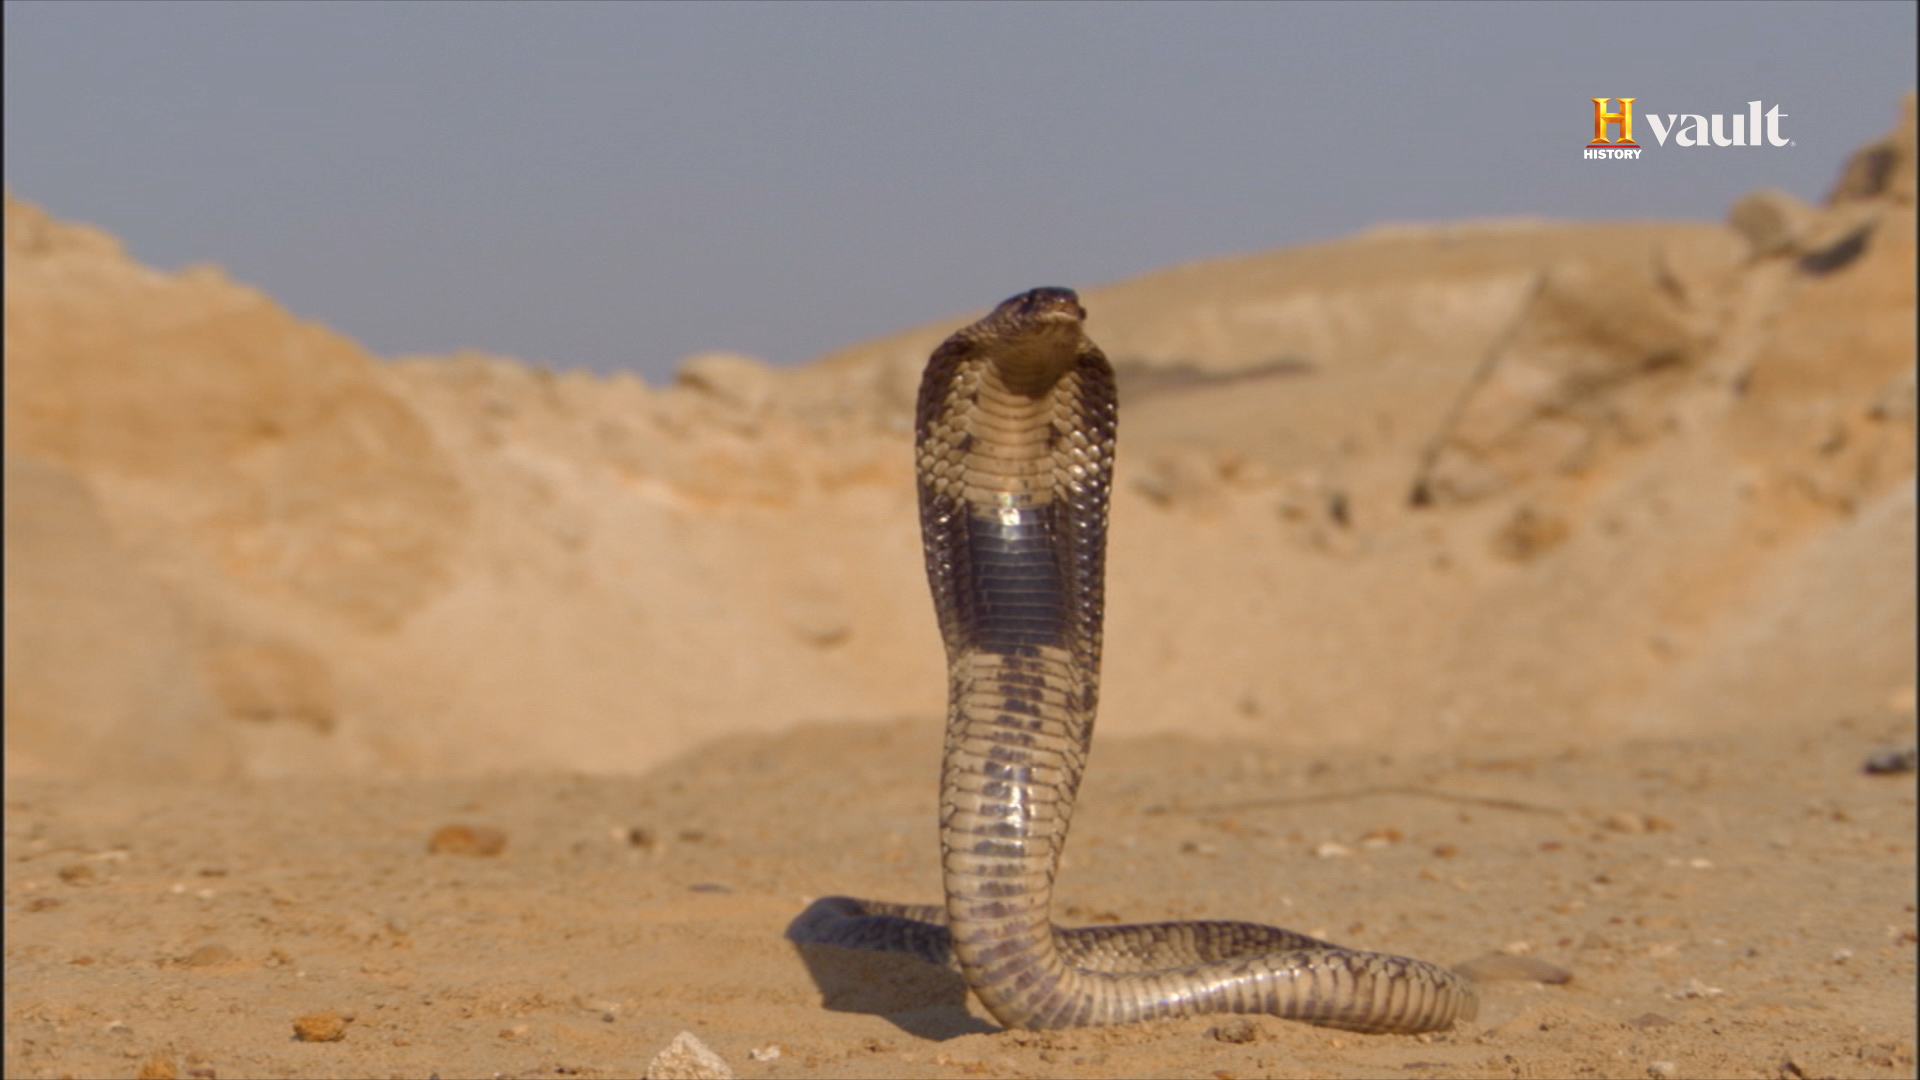 Toxicology and snakes in ptolemaic Egyptian dynasty: The suicide